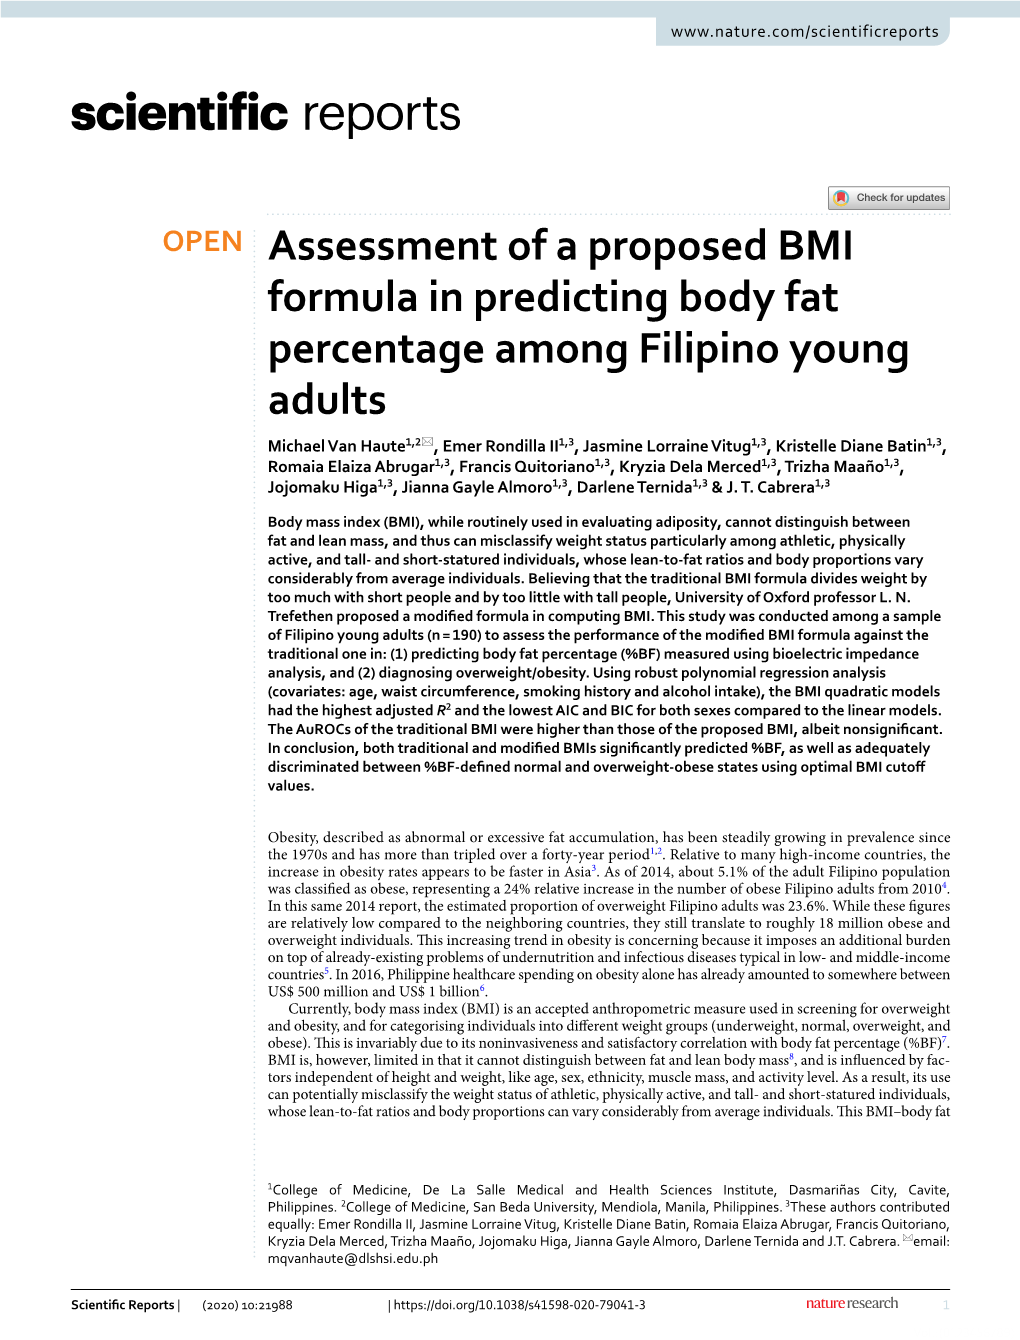 Assessment of a Proposed BMI Formula in Predicting Body Fat Percentage Among Filipino Young Adults